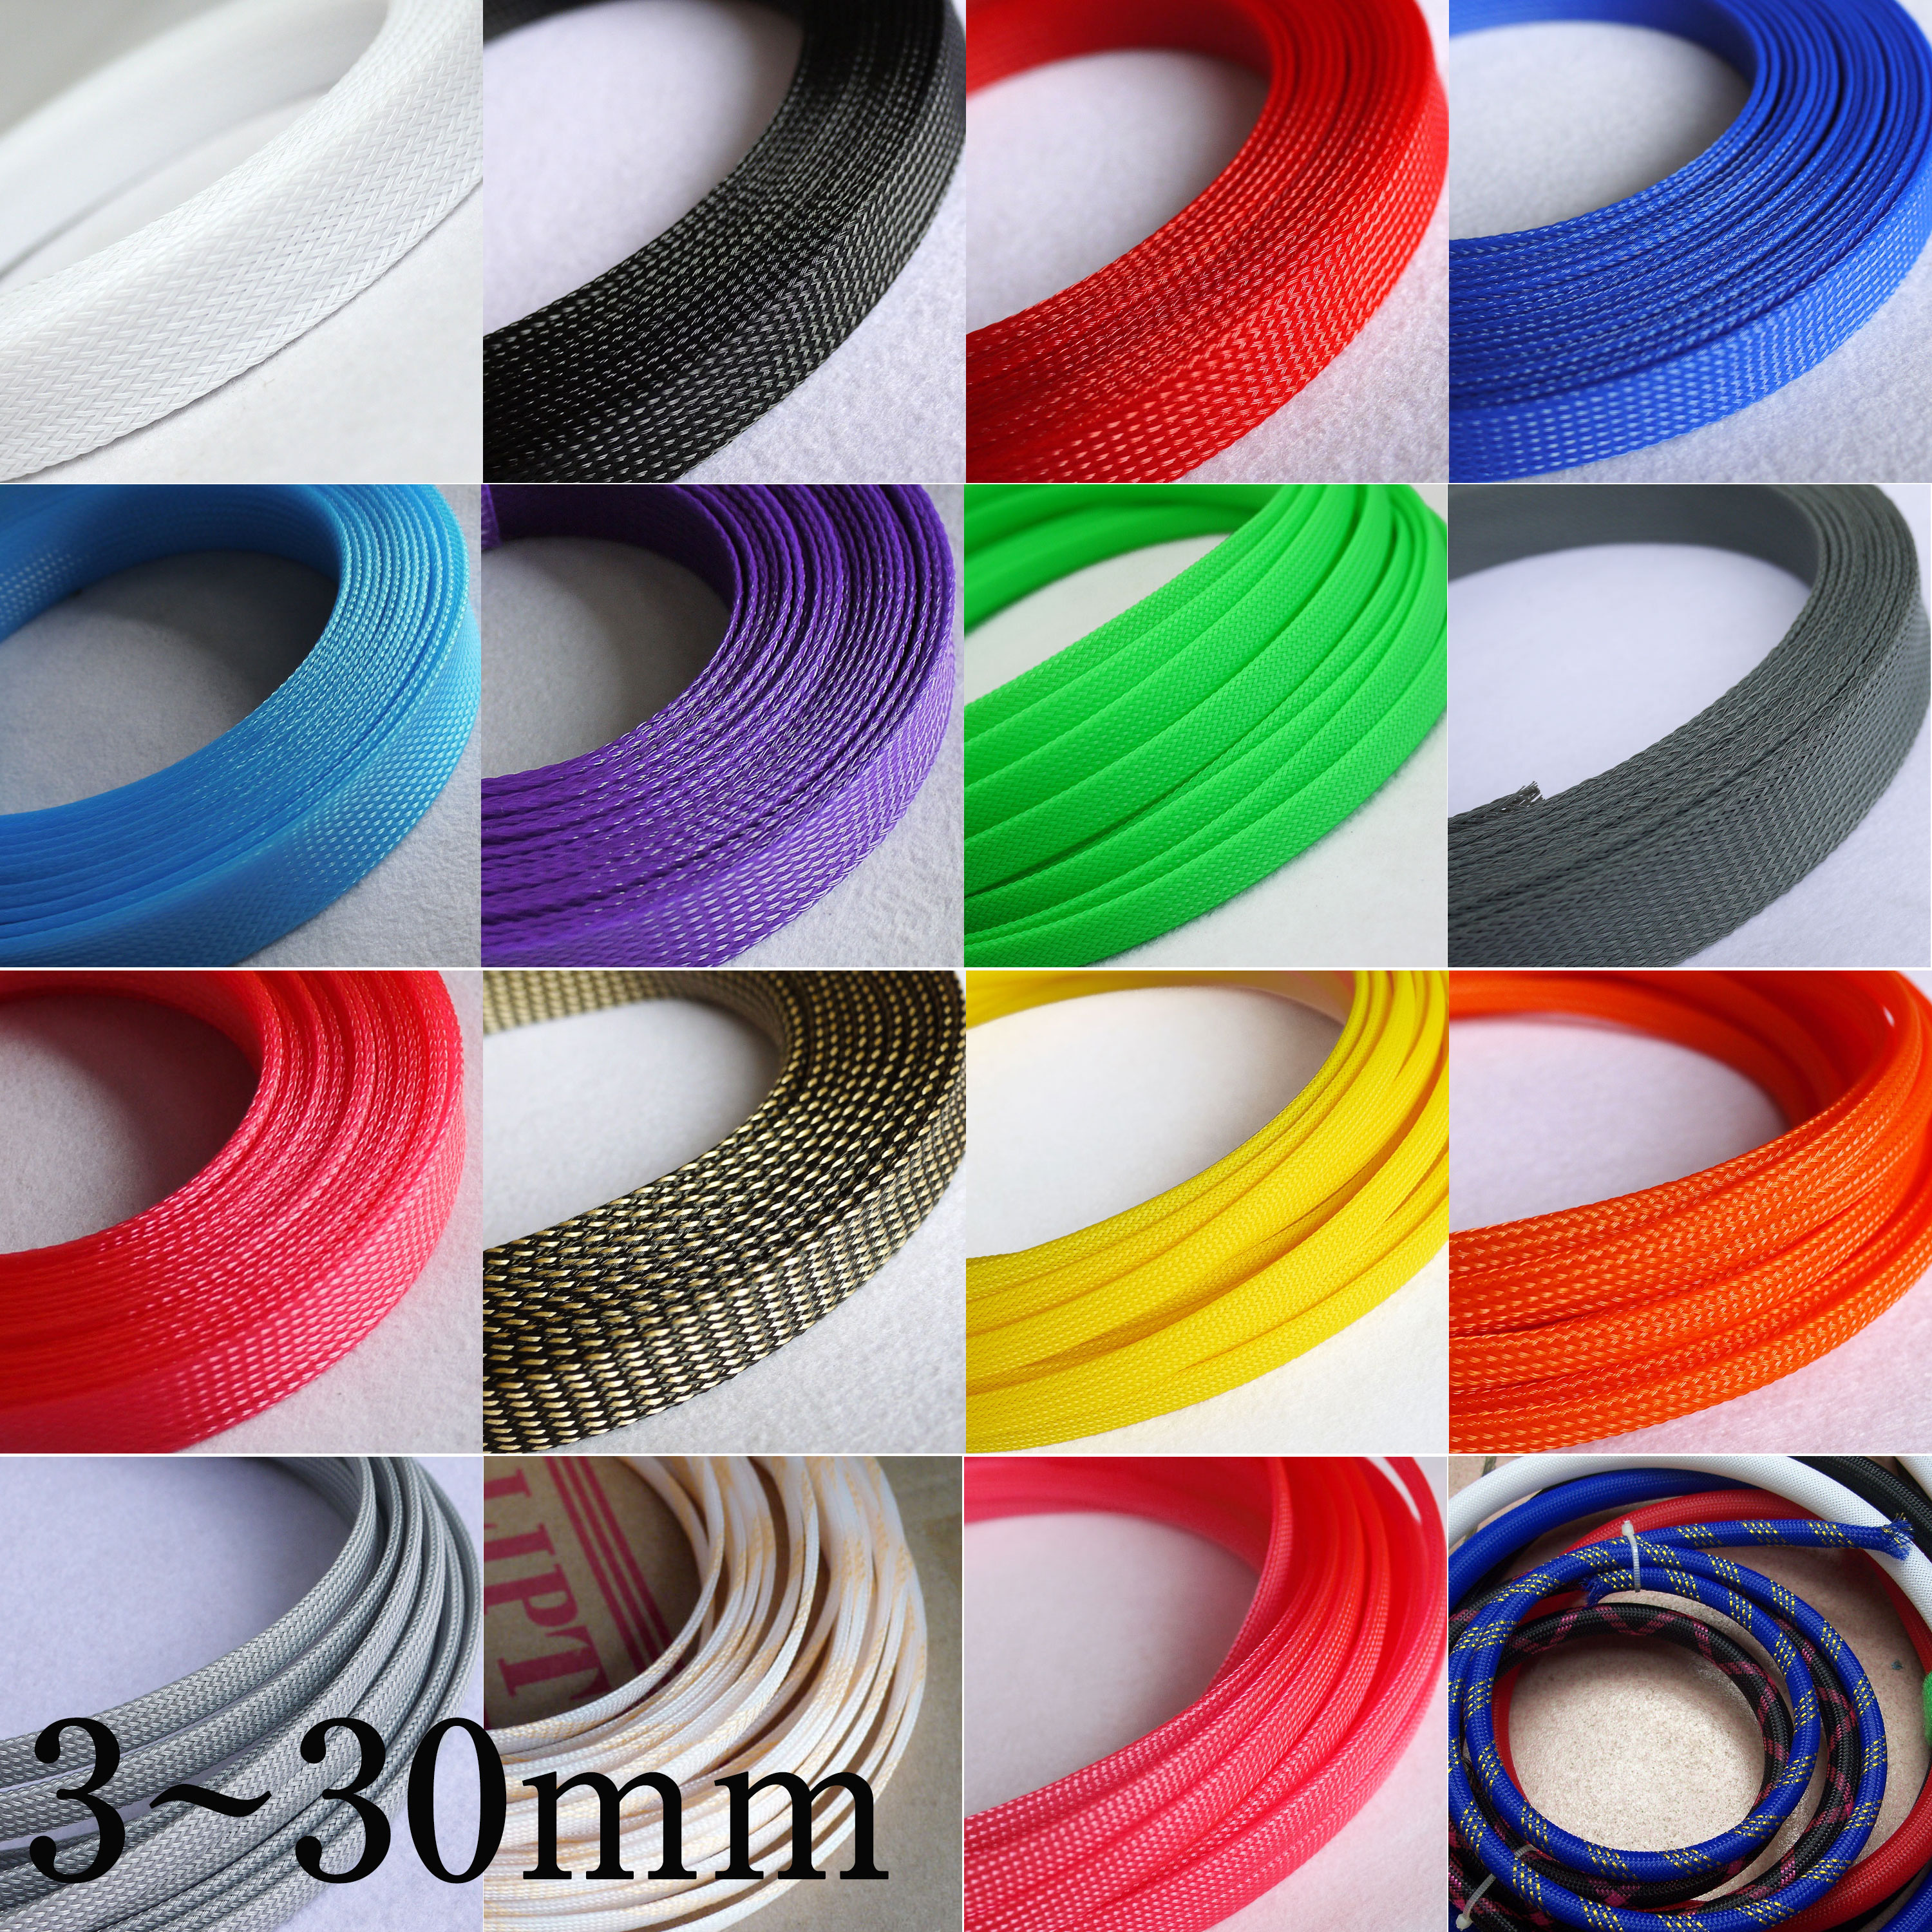 Cotton Tube Sheath Cover Cable Wire Sleeve Sleeving 10mm